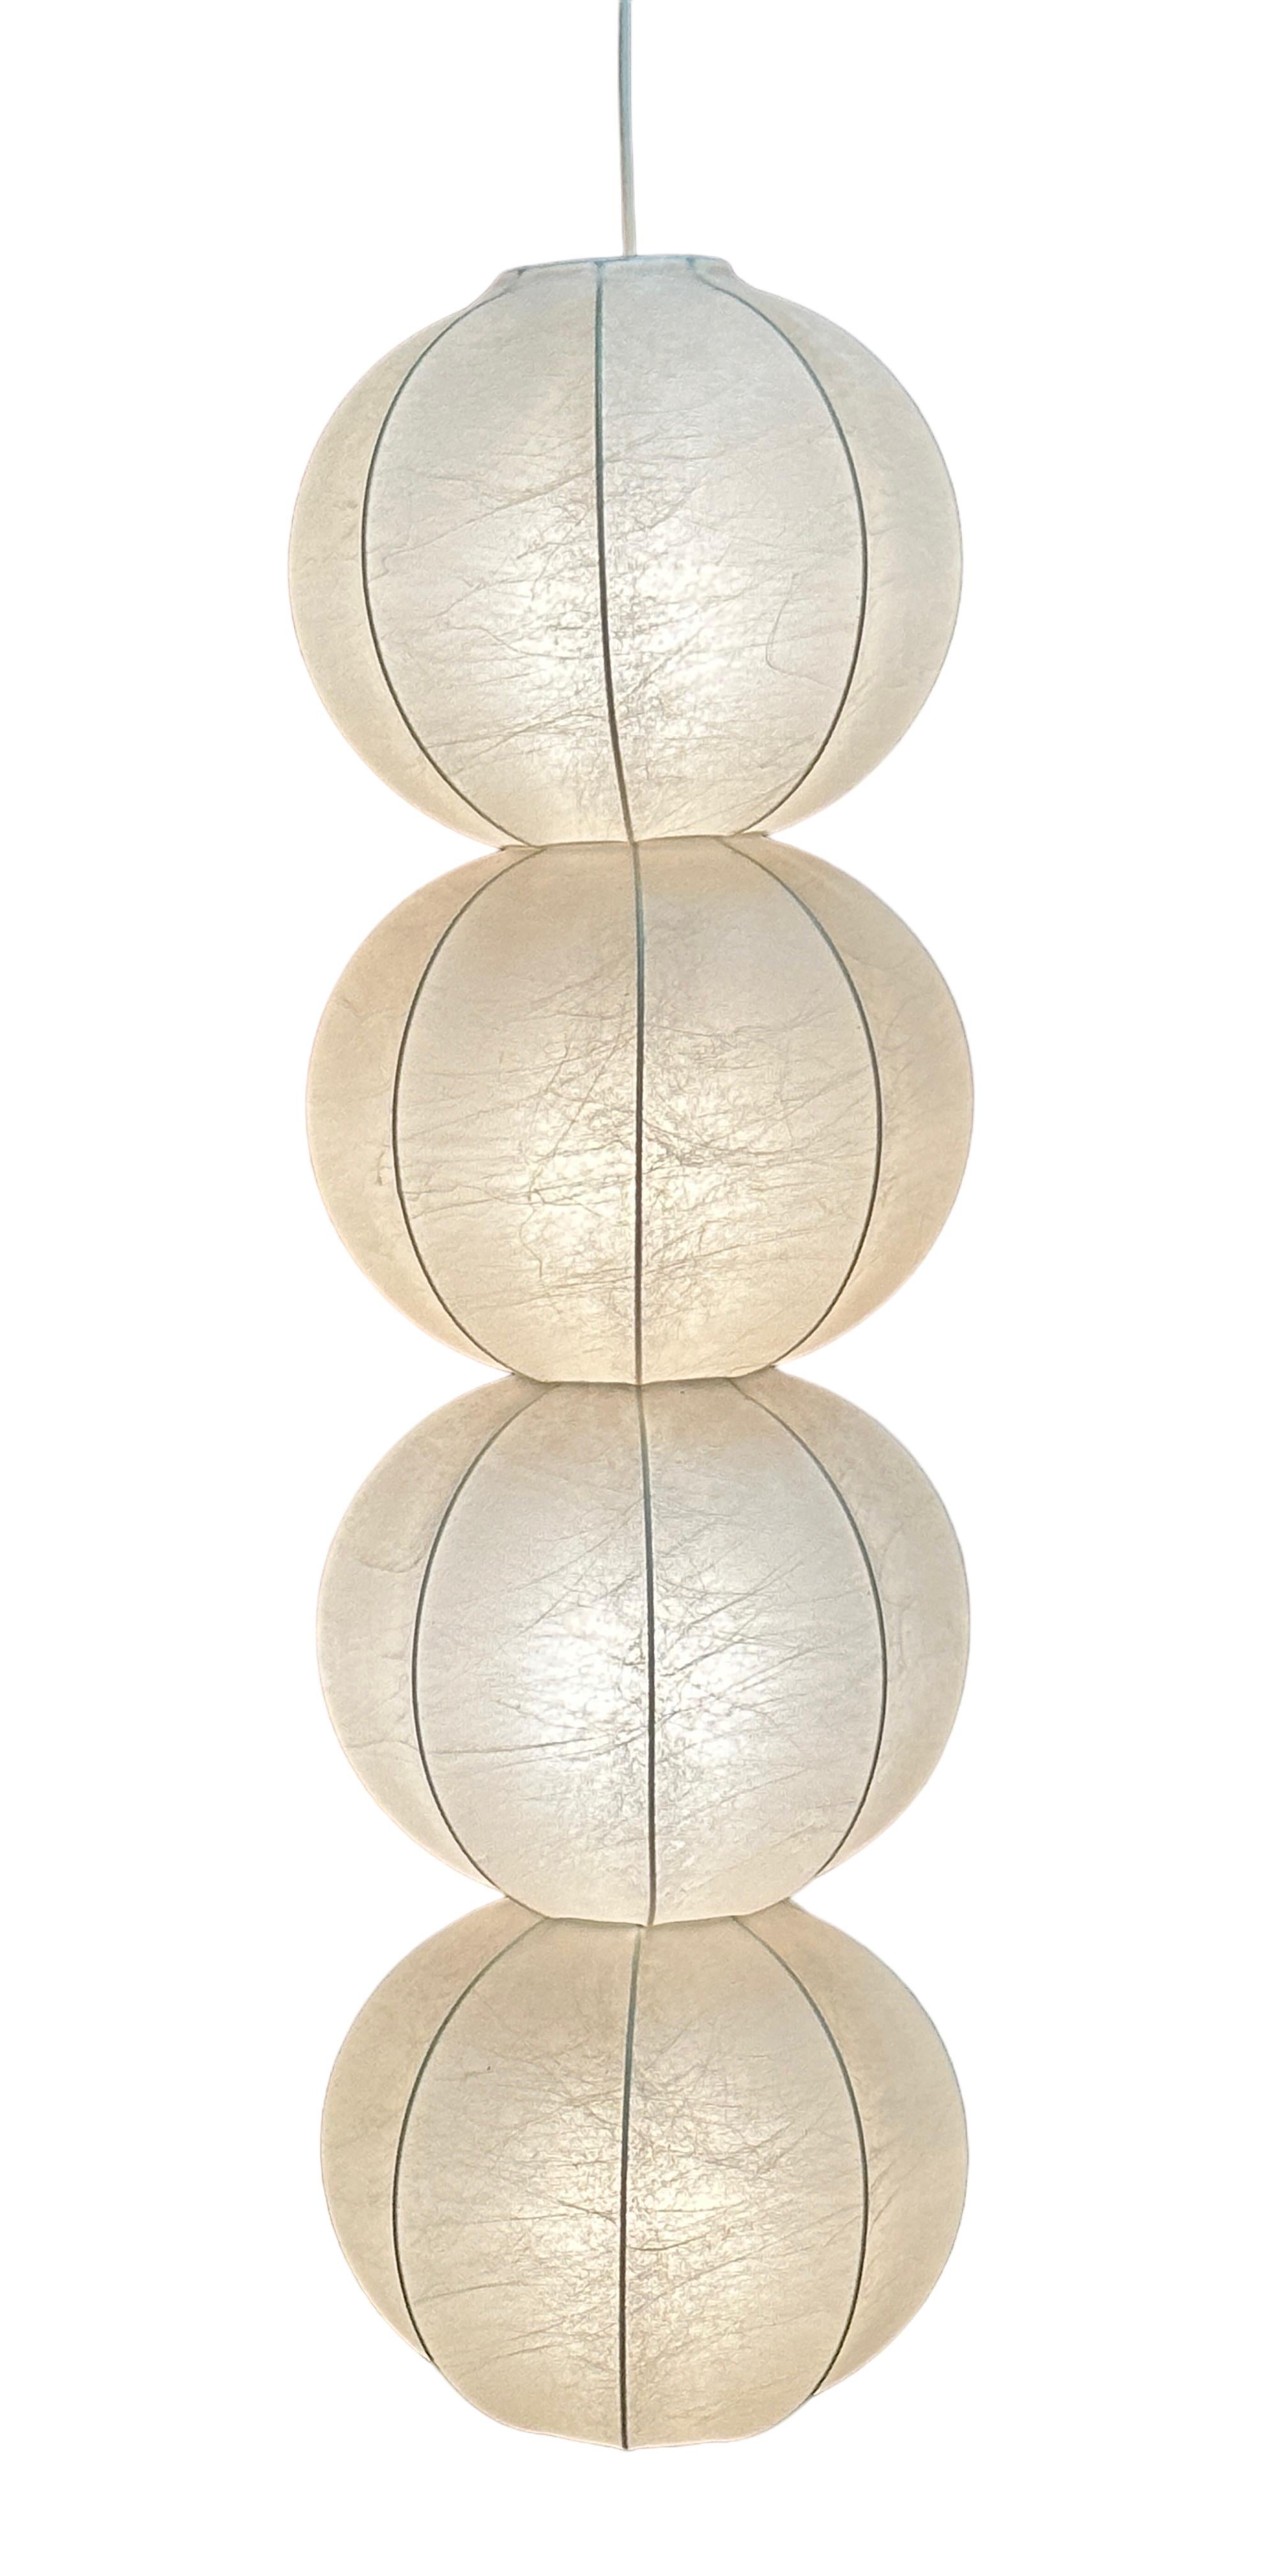 A beautifully Cocoon pendant light, by Friedel Wauer for Goldkant Leuchten, Germany. Comes fout of the Achille Castiglioni Era. Lampshades in very good vintage condition. Pendant with canopy is approx. 118